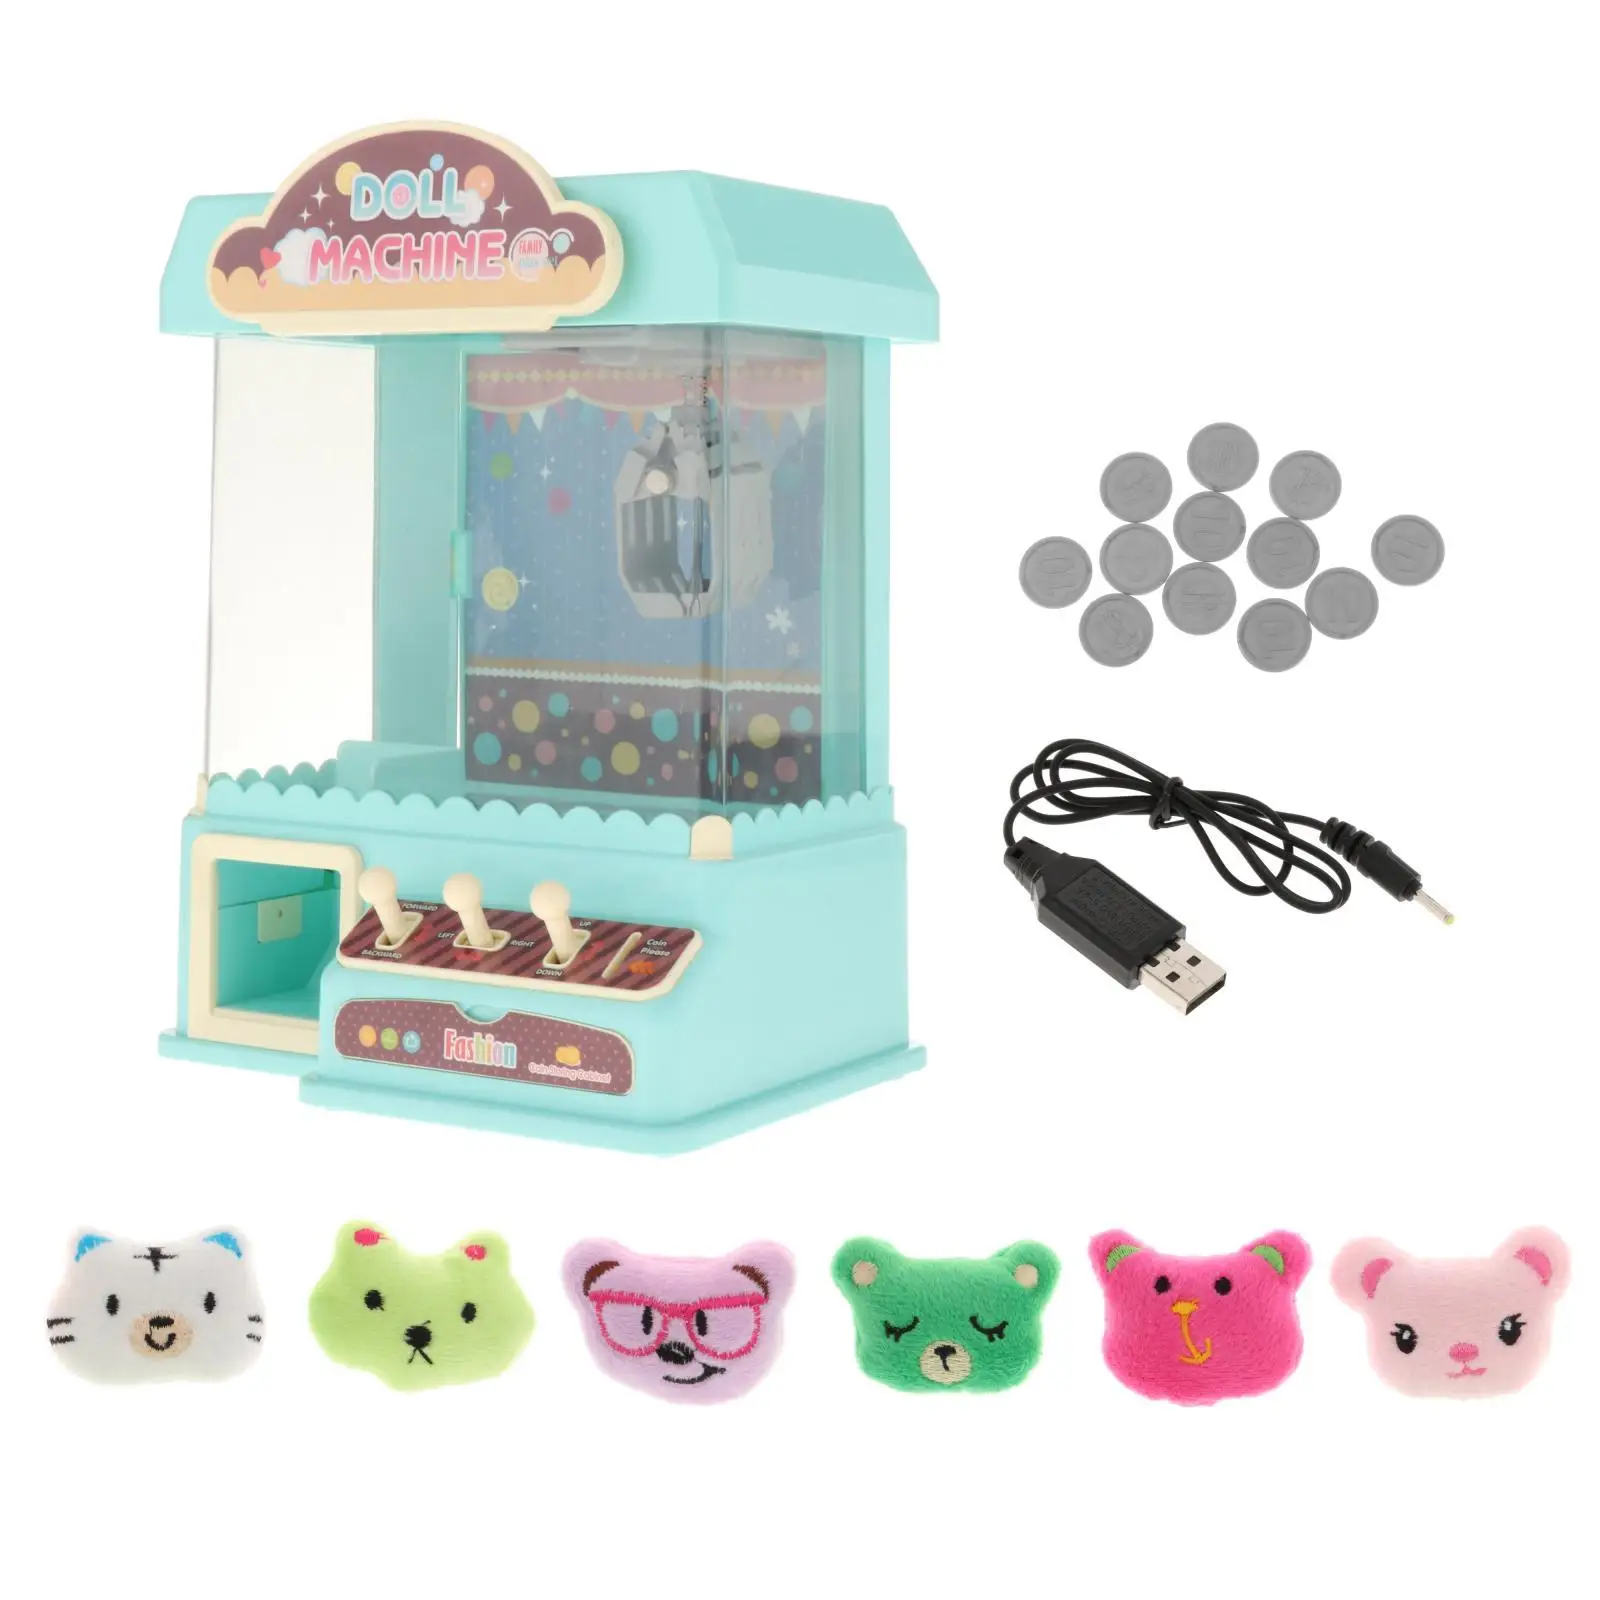 Rechargeable Manual Claw Machine Toy with Lights & Sounds Girl Grab Doll Clip Vending Grabber Machine for Children Kids